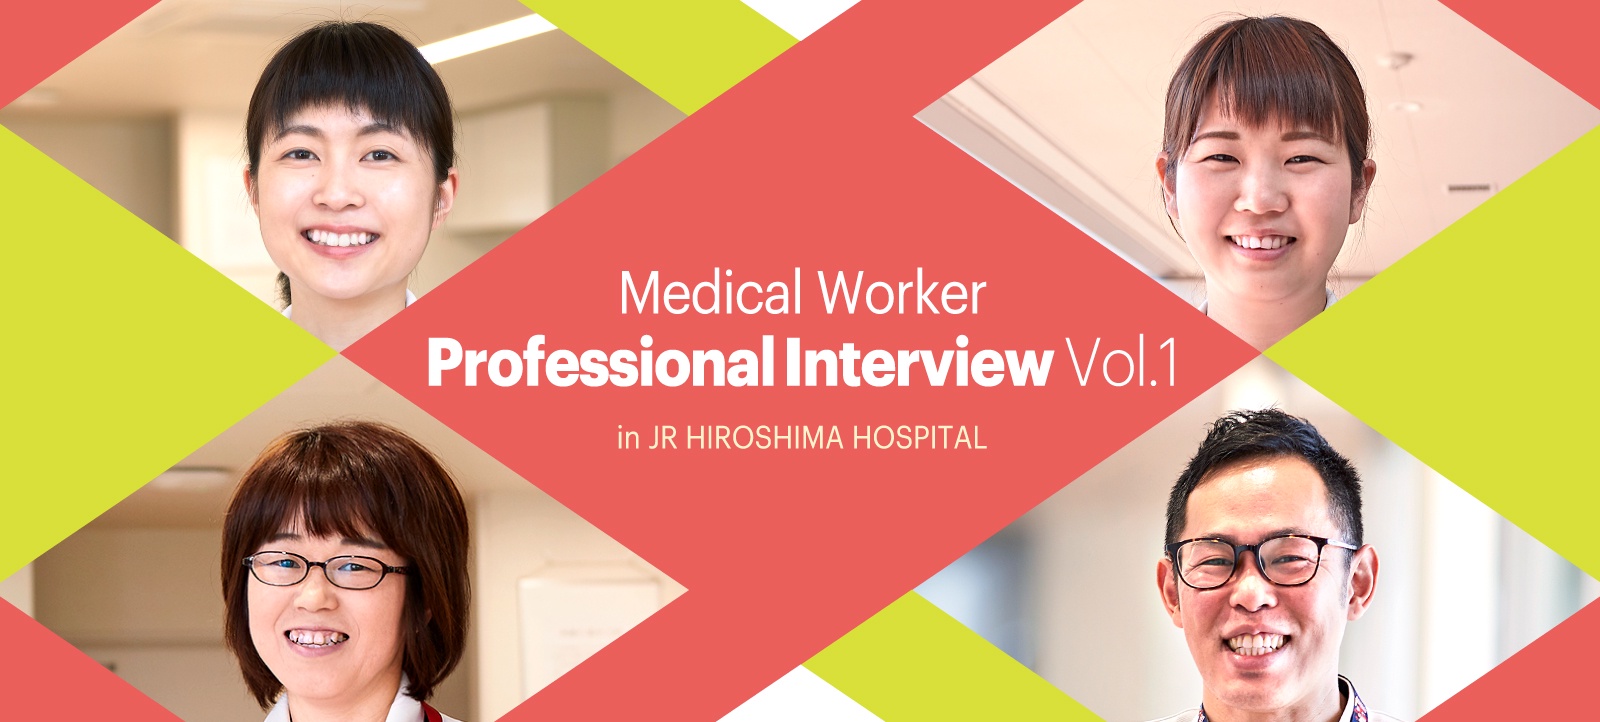 Medical Worker Professional Interview Vol.1